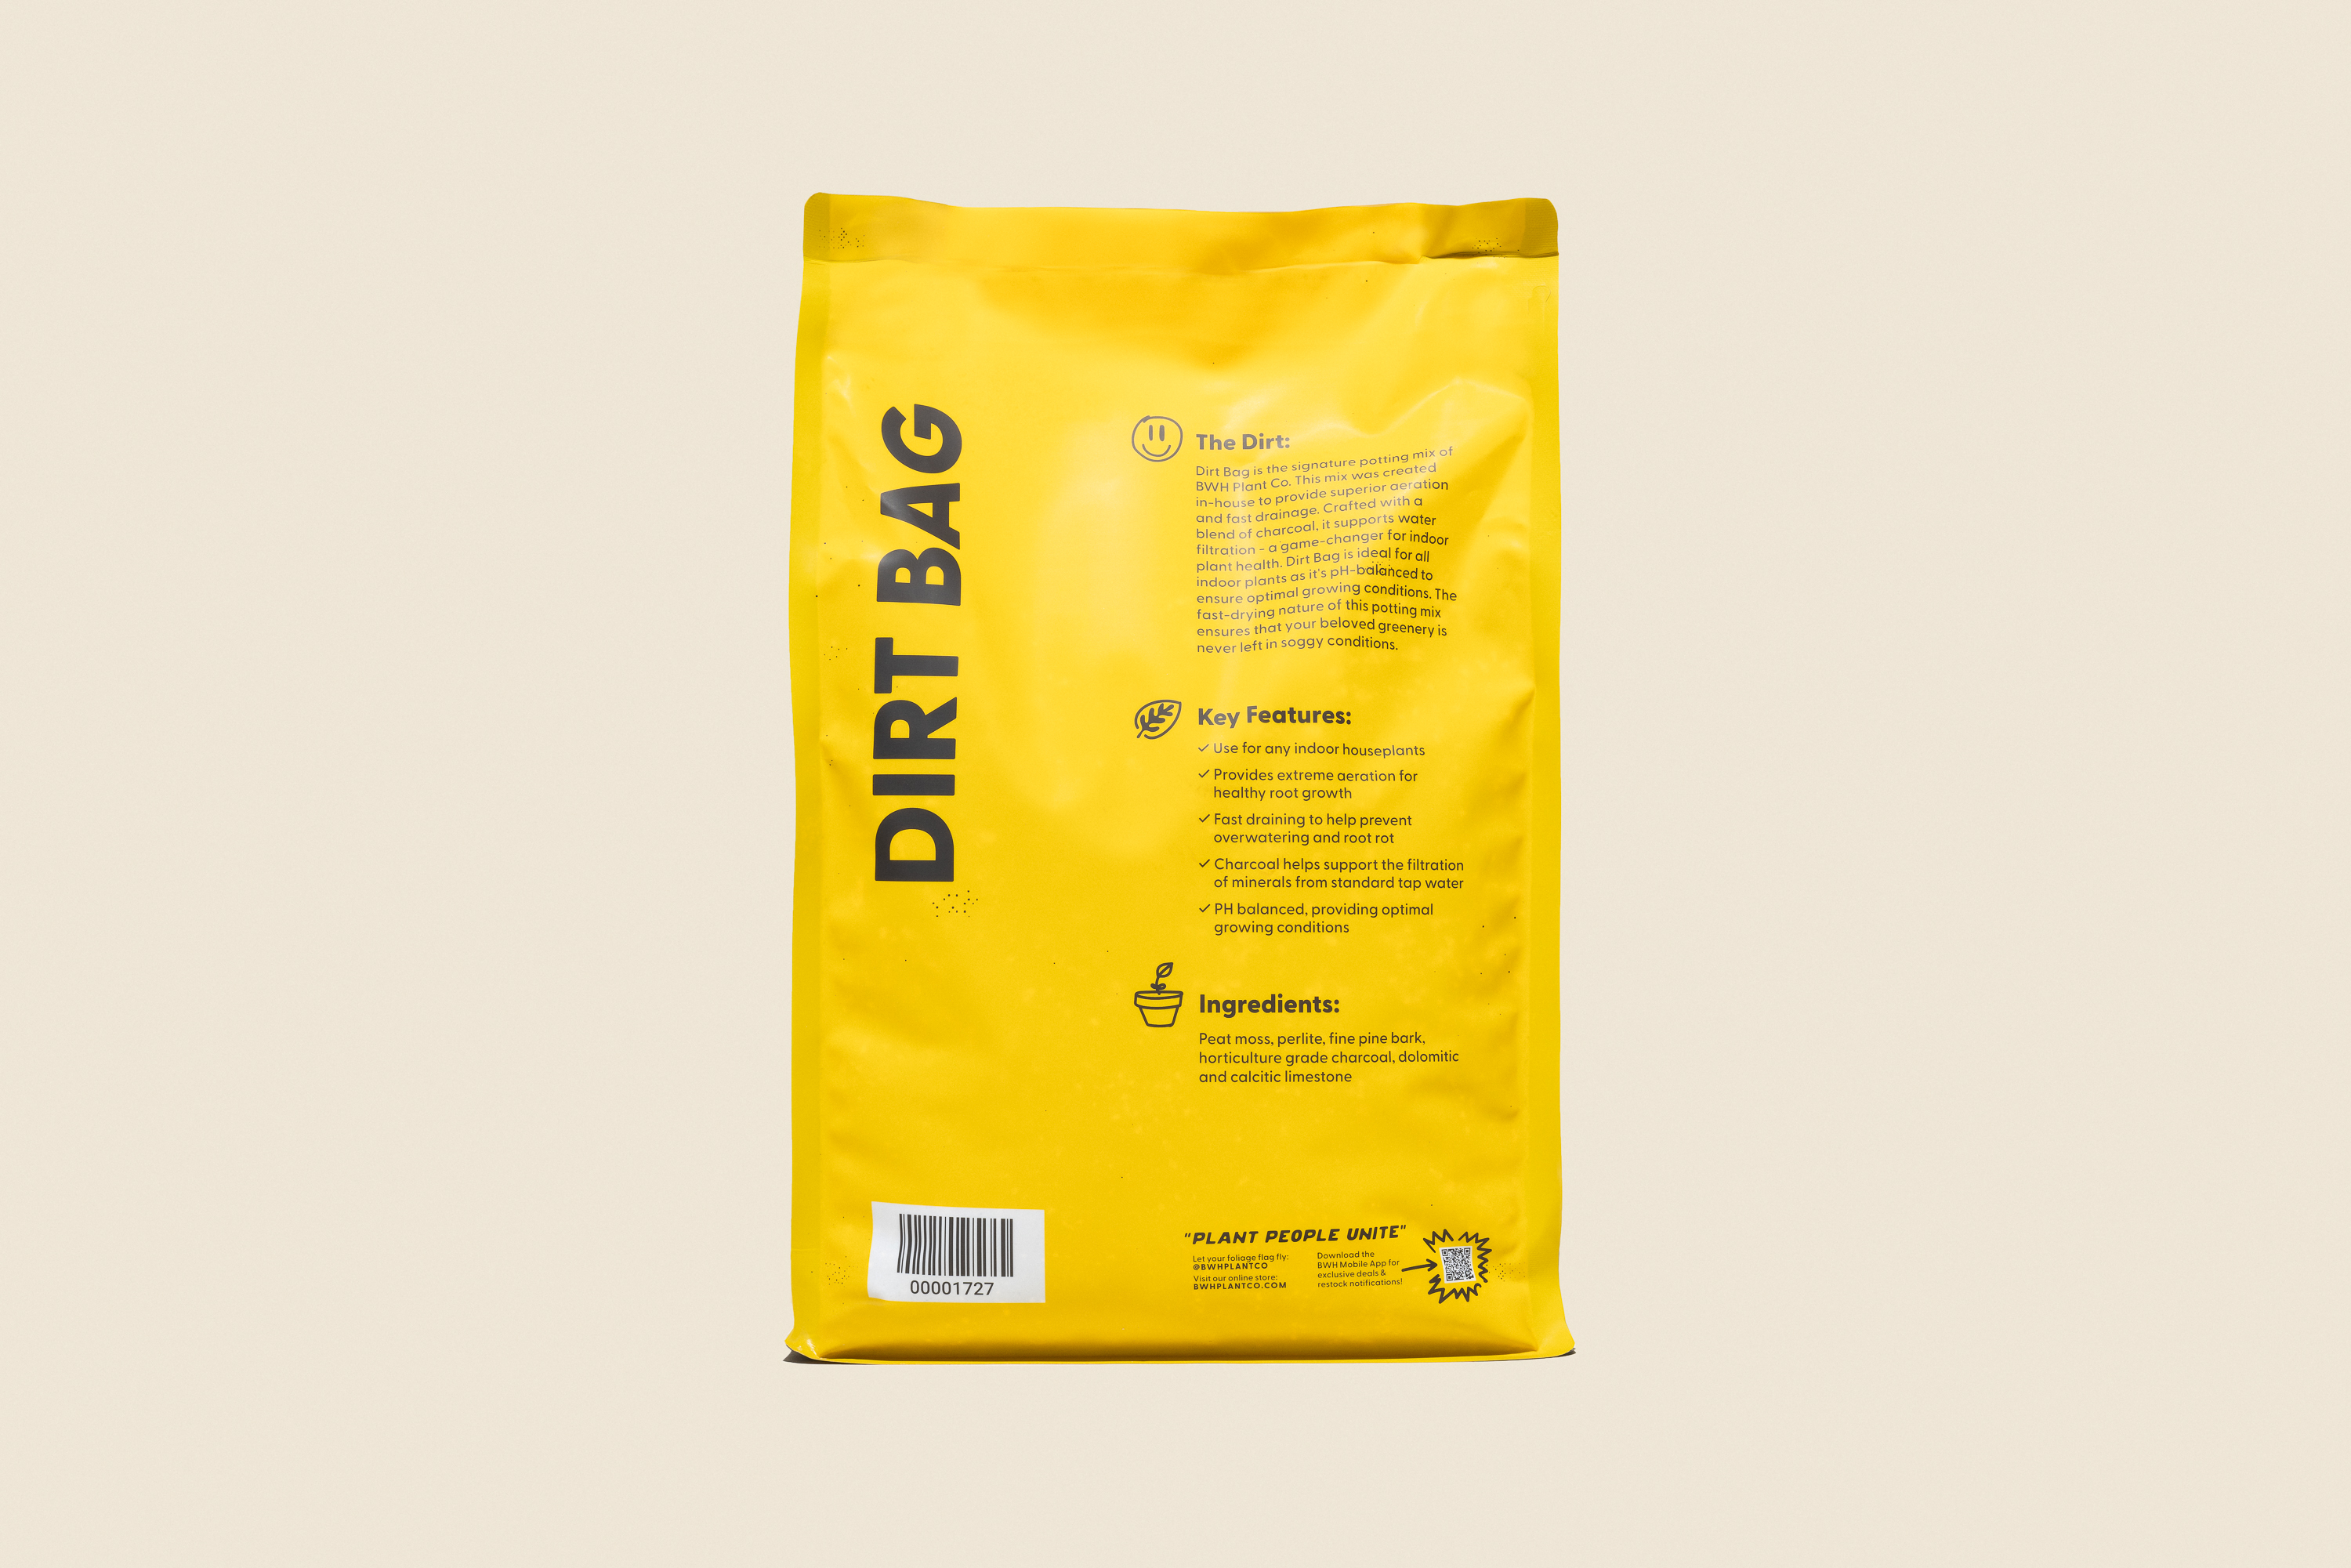 BWH Plant Co Gives “Dirt Bags” a Good Name with Their Sugar-Based Packaging